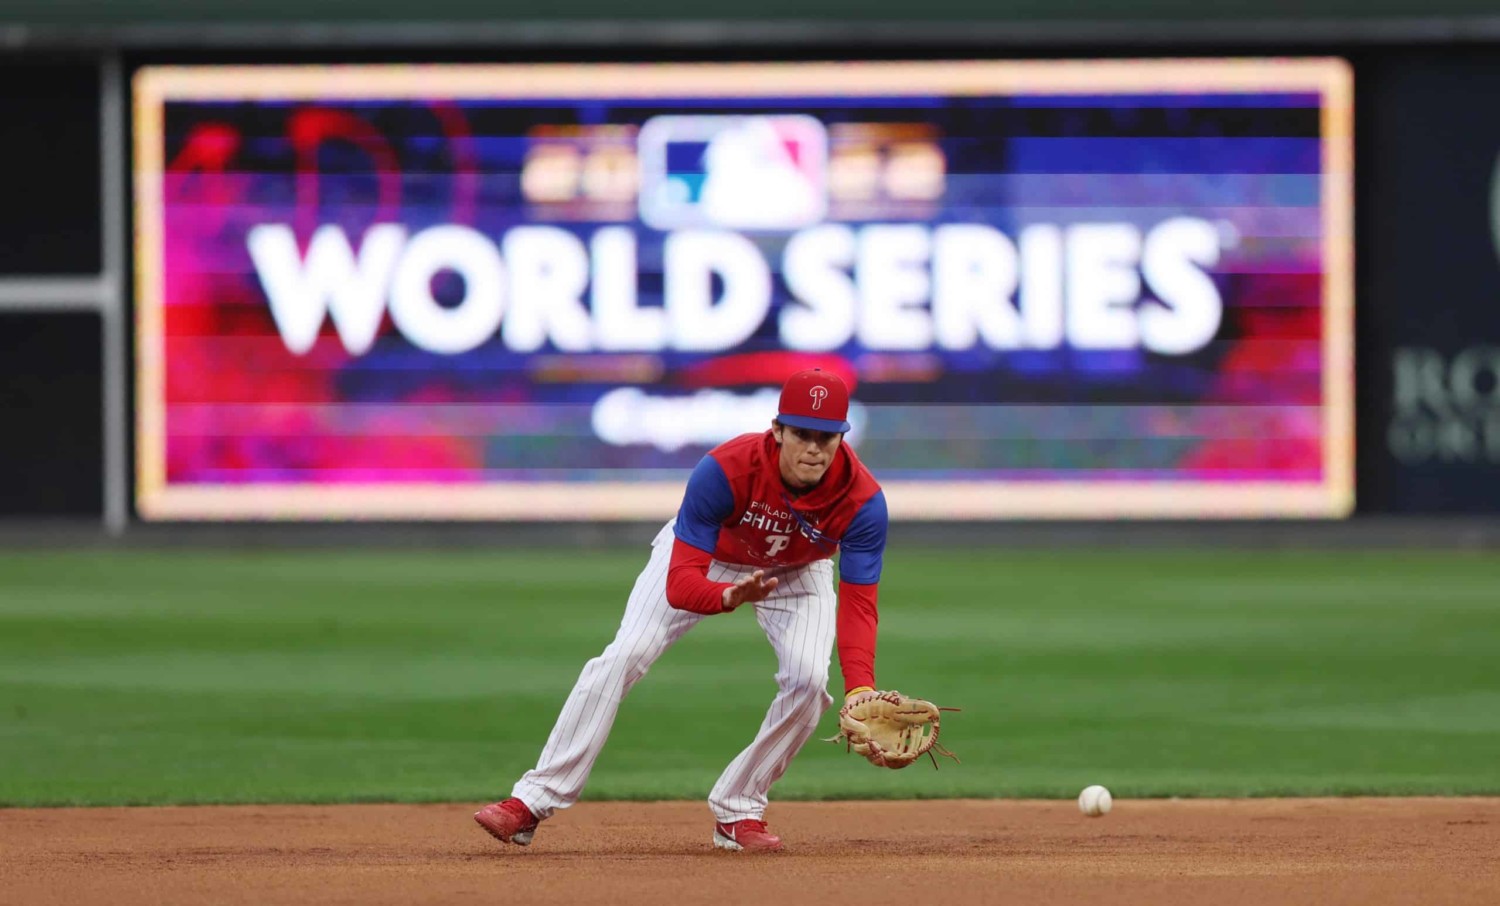 After Strong Viewership Start, World Series Will Compete With NFL